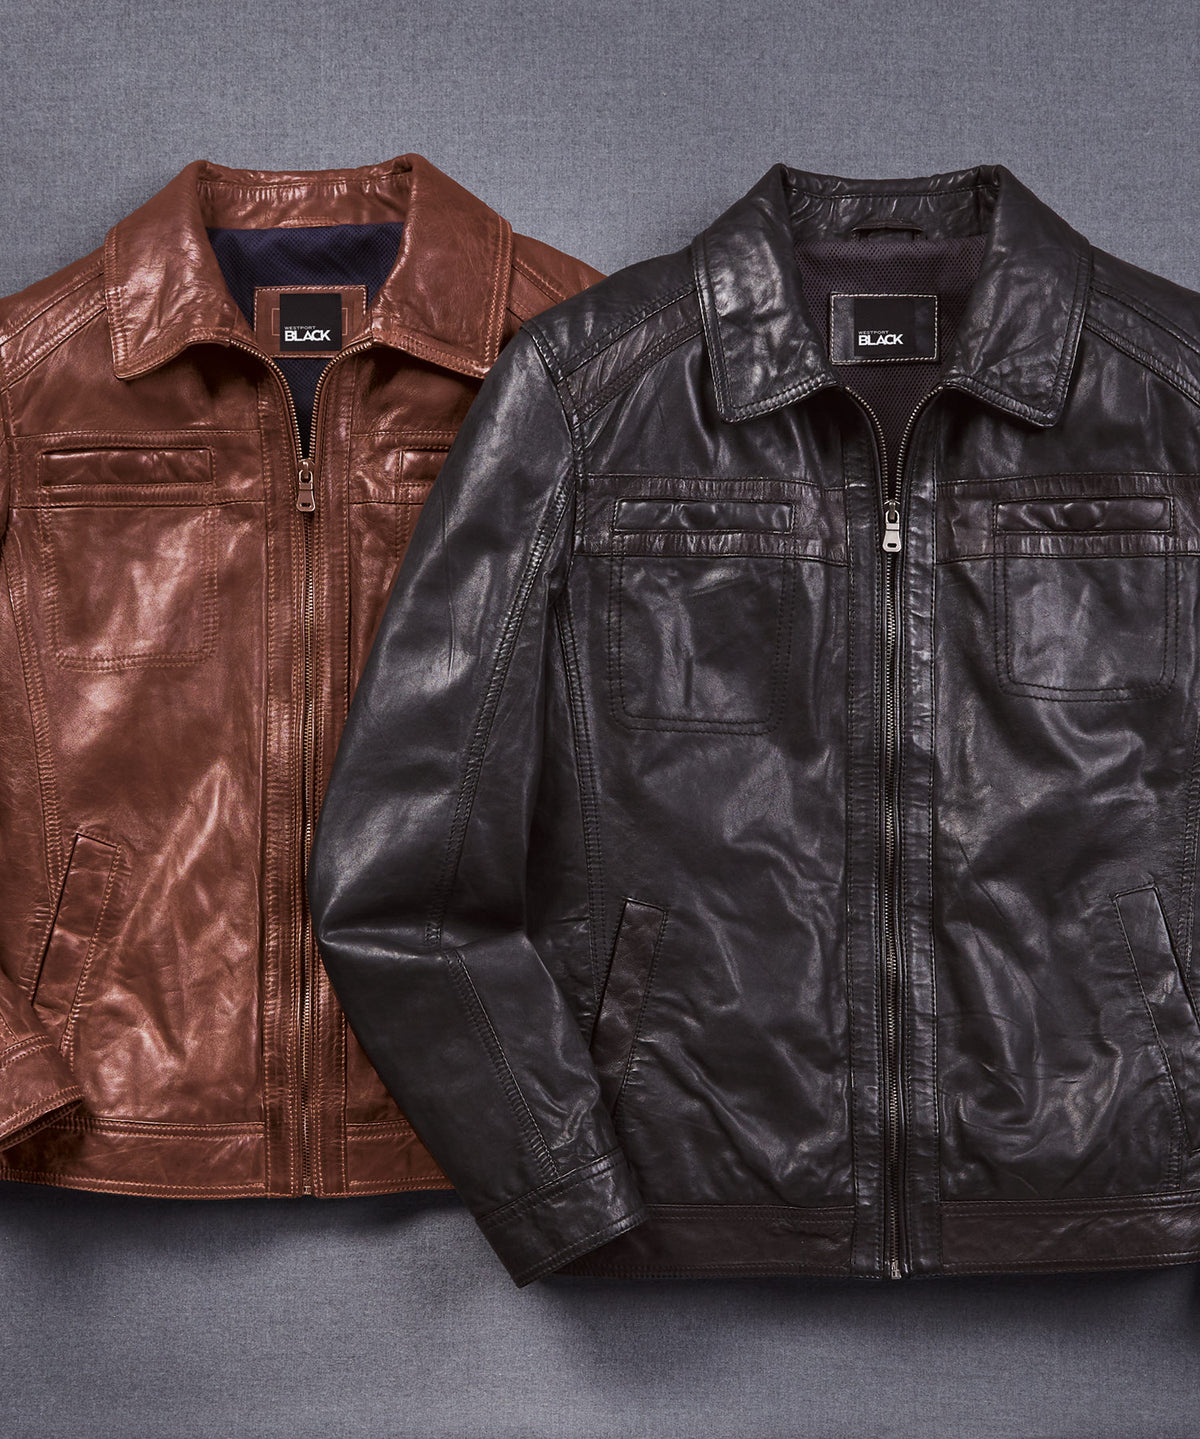 Big and Tall Leather Coats for Men at Westport Big & Tall Tagged